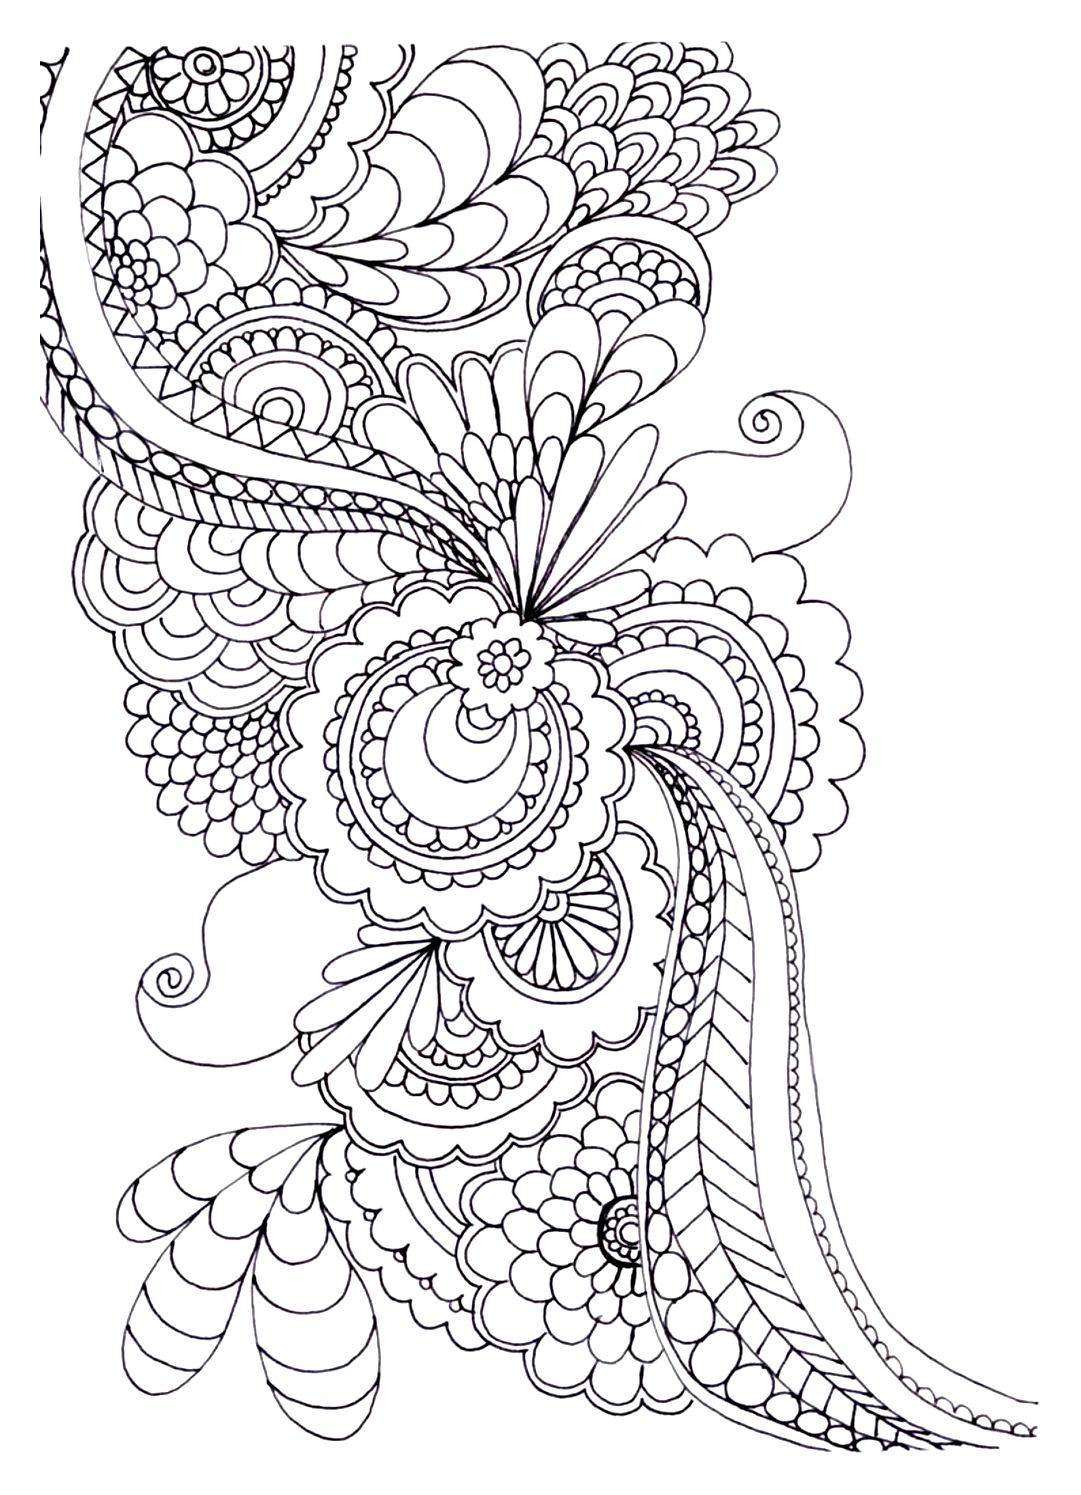 Adult Coloring Free Pages
 20 Free Adult Colouring Pages The Organised Housewife